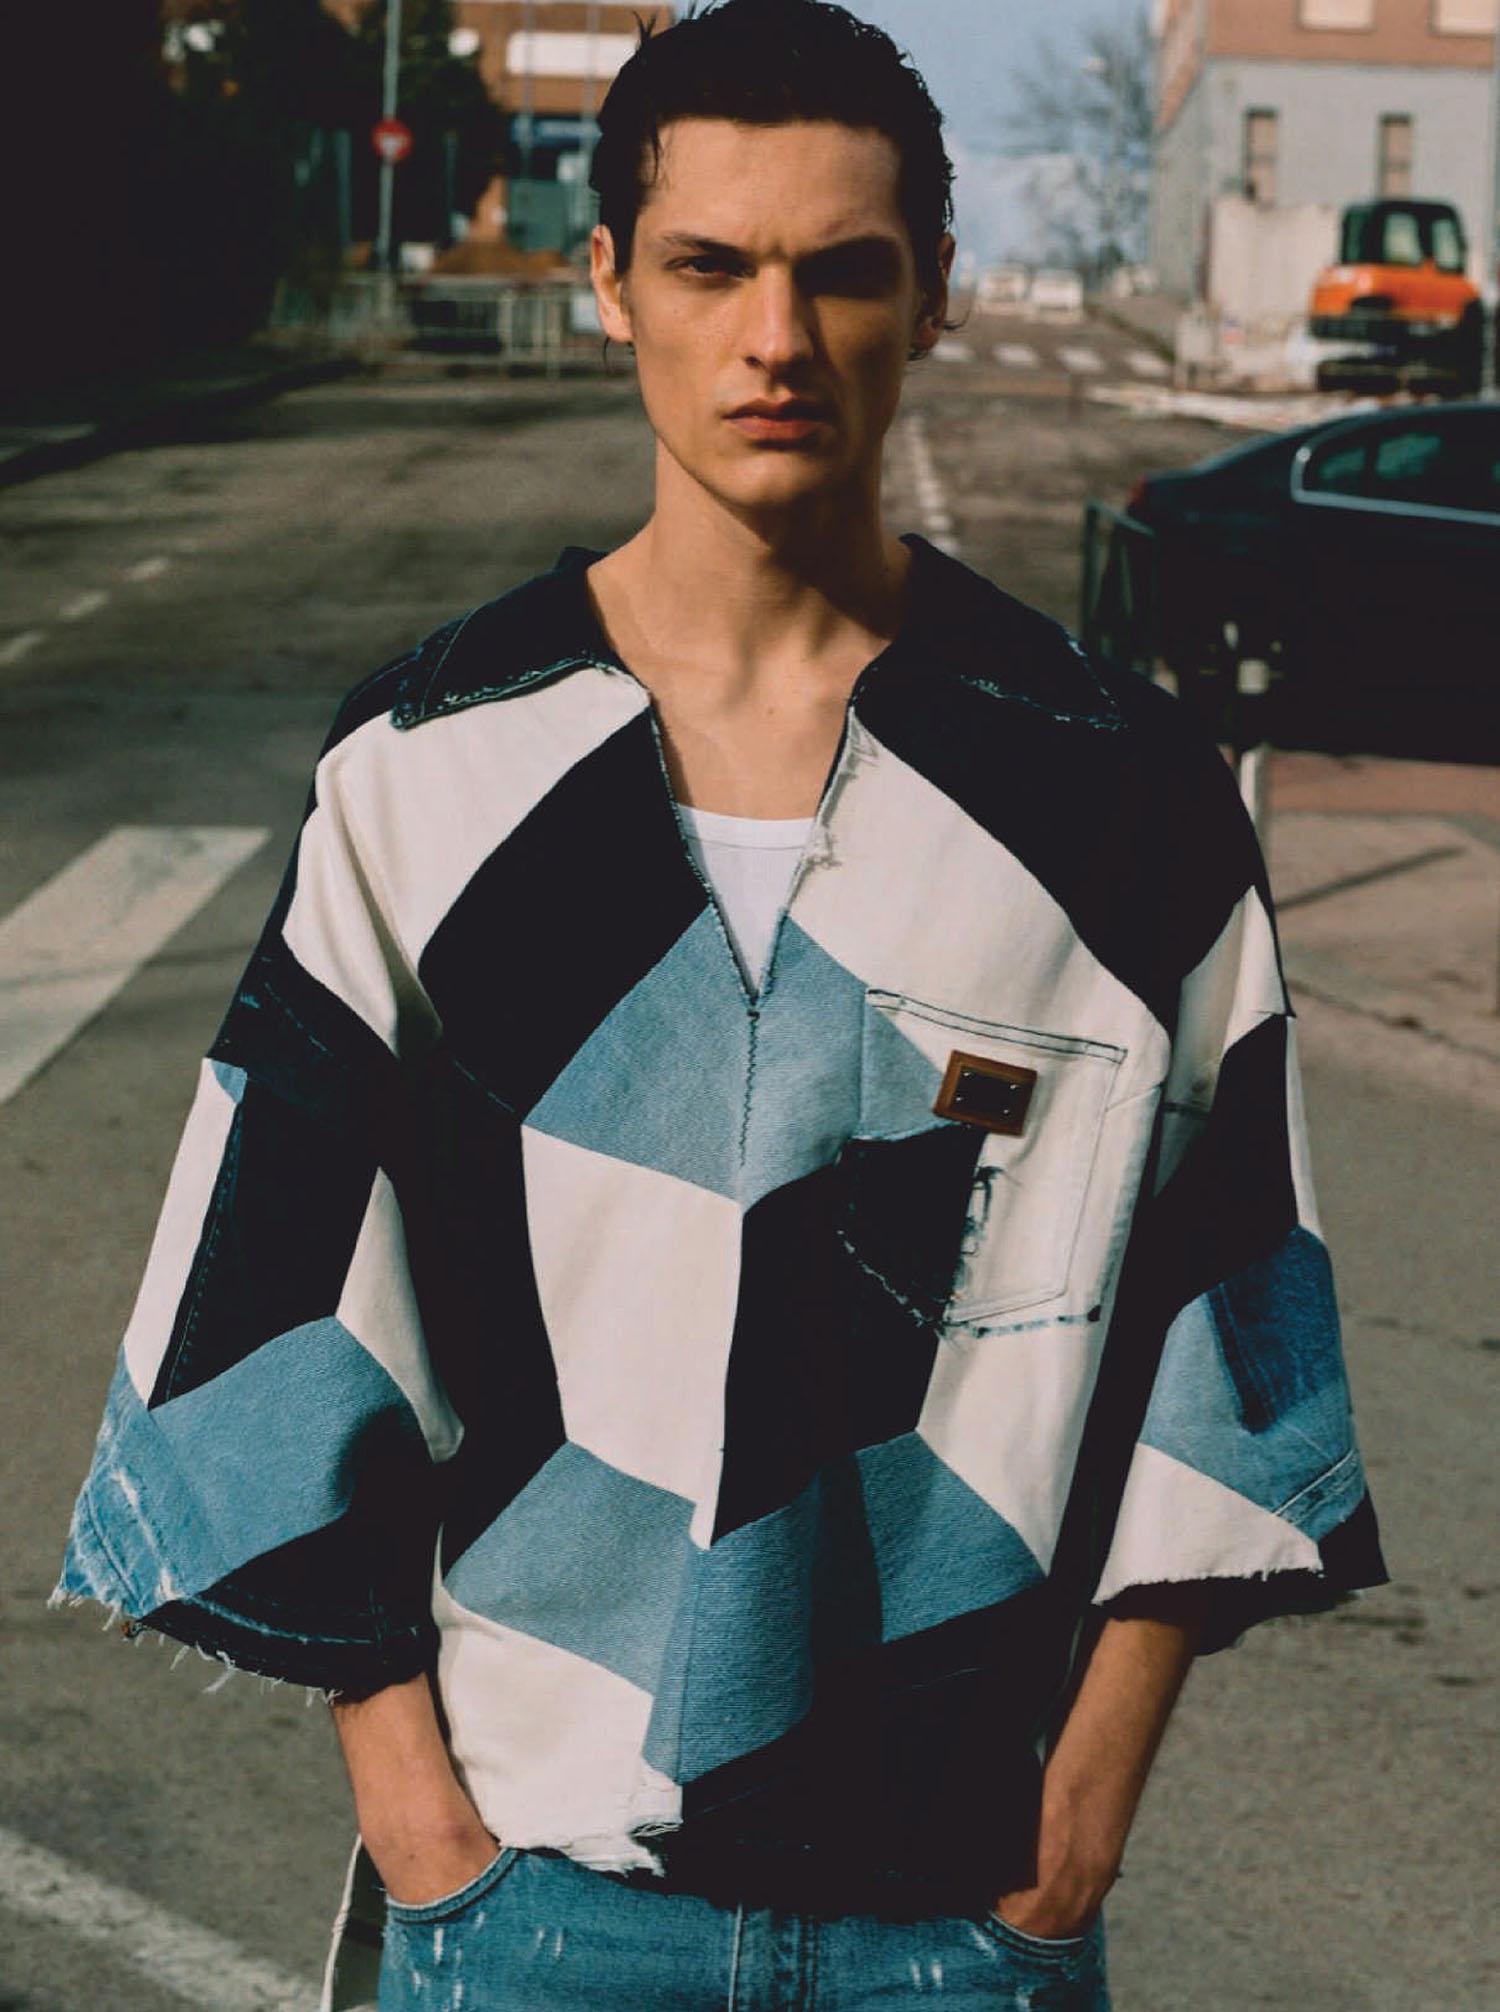 It's Street Life: Valentin Caron by Javier Castan for Esquire Espana March 2021